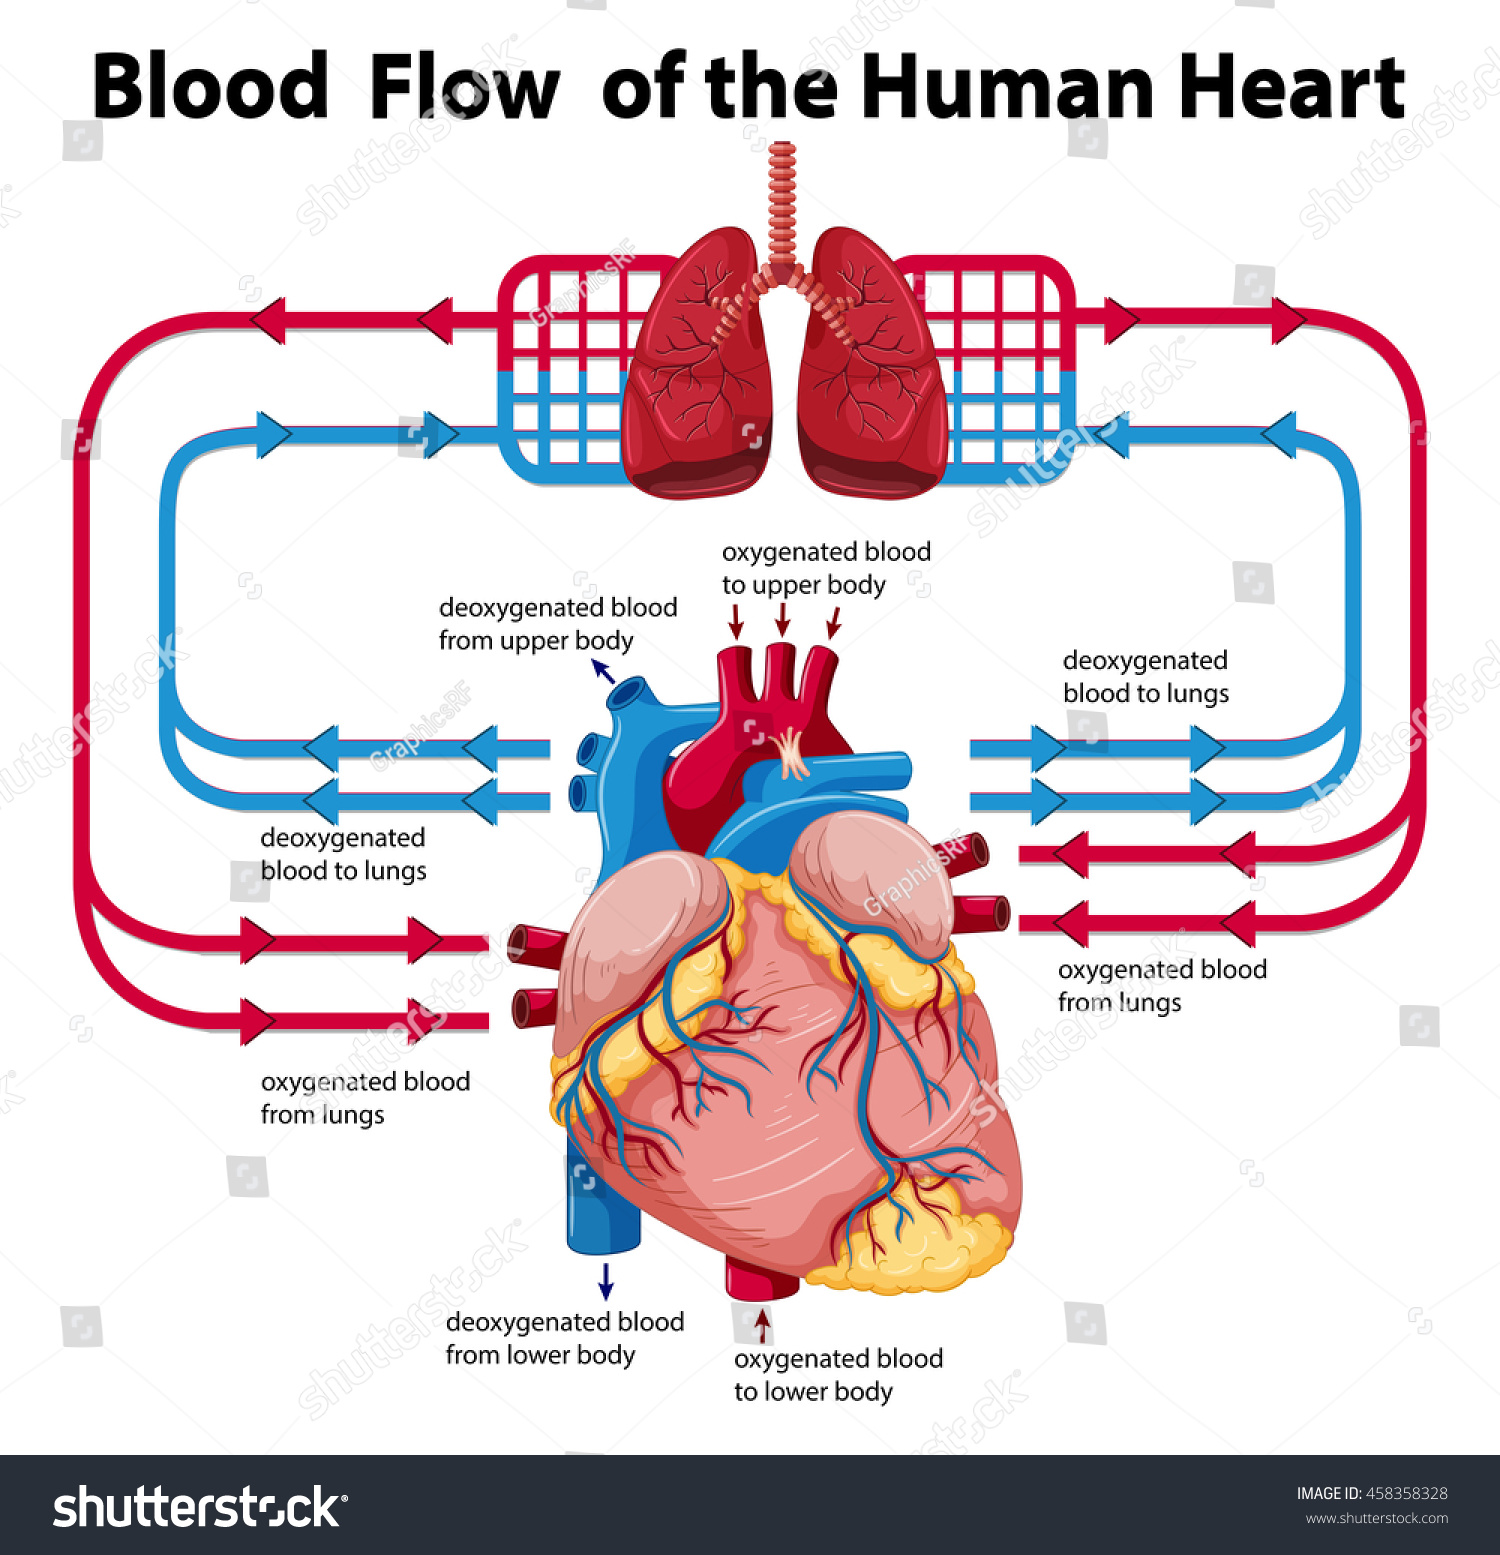 Blood vessels are intricate networks of hollow tubes that transport blood throughout the en. Diagram Showing Blood Flow Human Heart Stock Vector Royalty Free 458358328